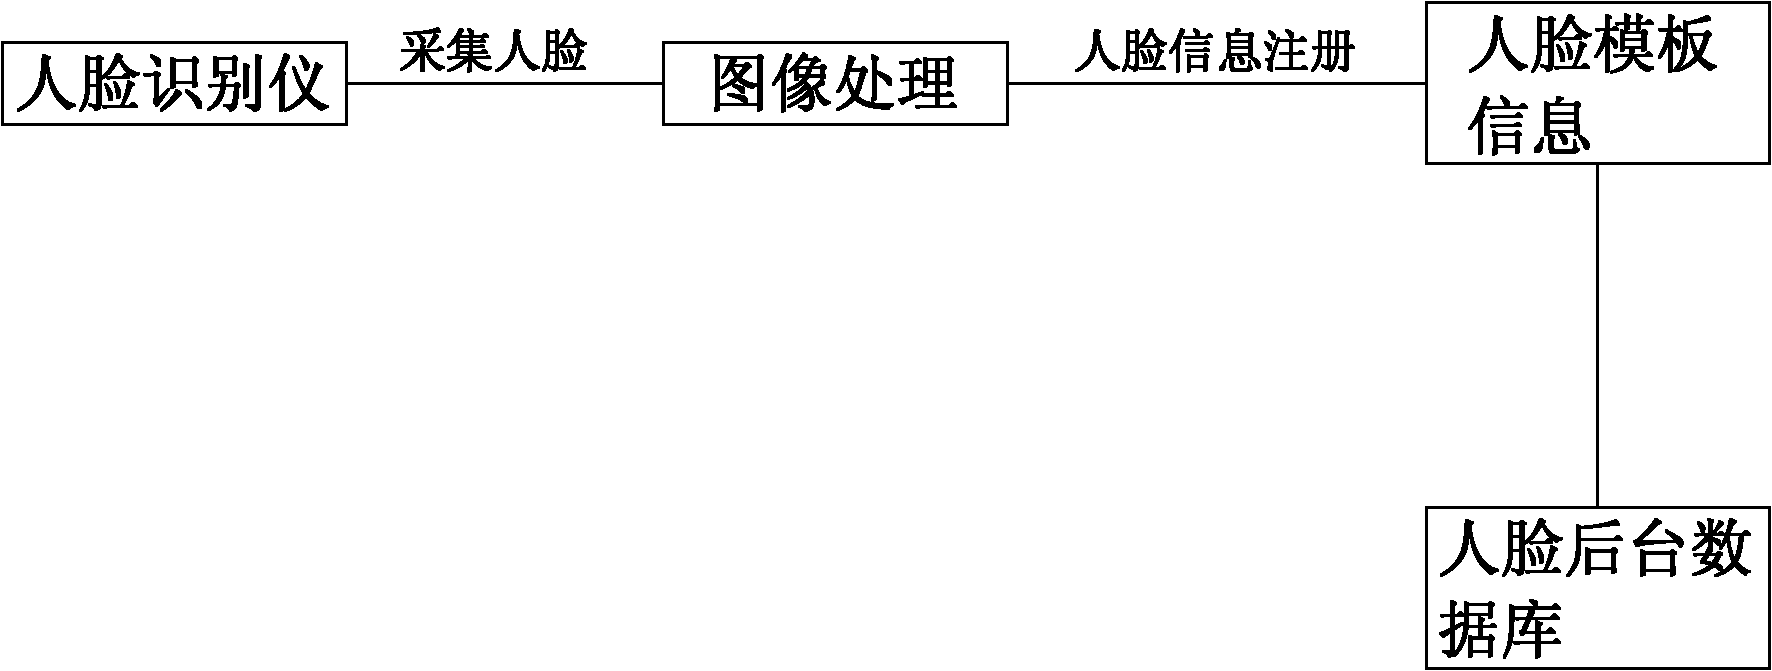 Bank VIP customer service system with intelligent face recognition and method